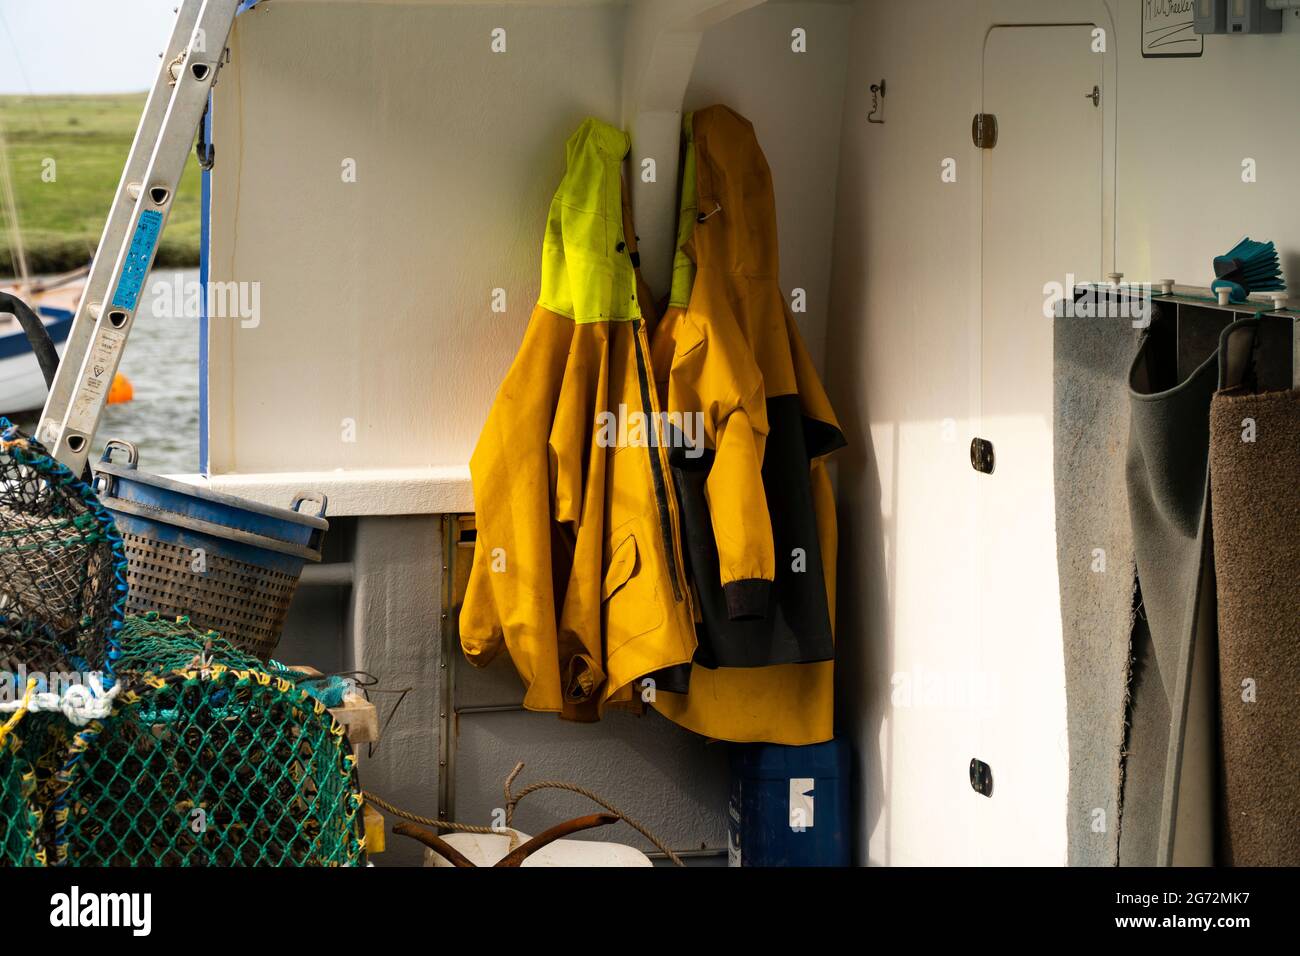 Coats Hanging Up High Resolution Stock Photography and Images - Alamy